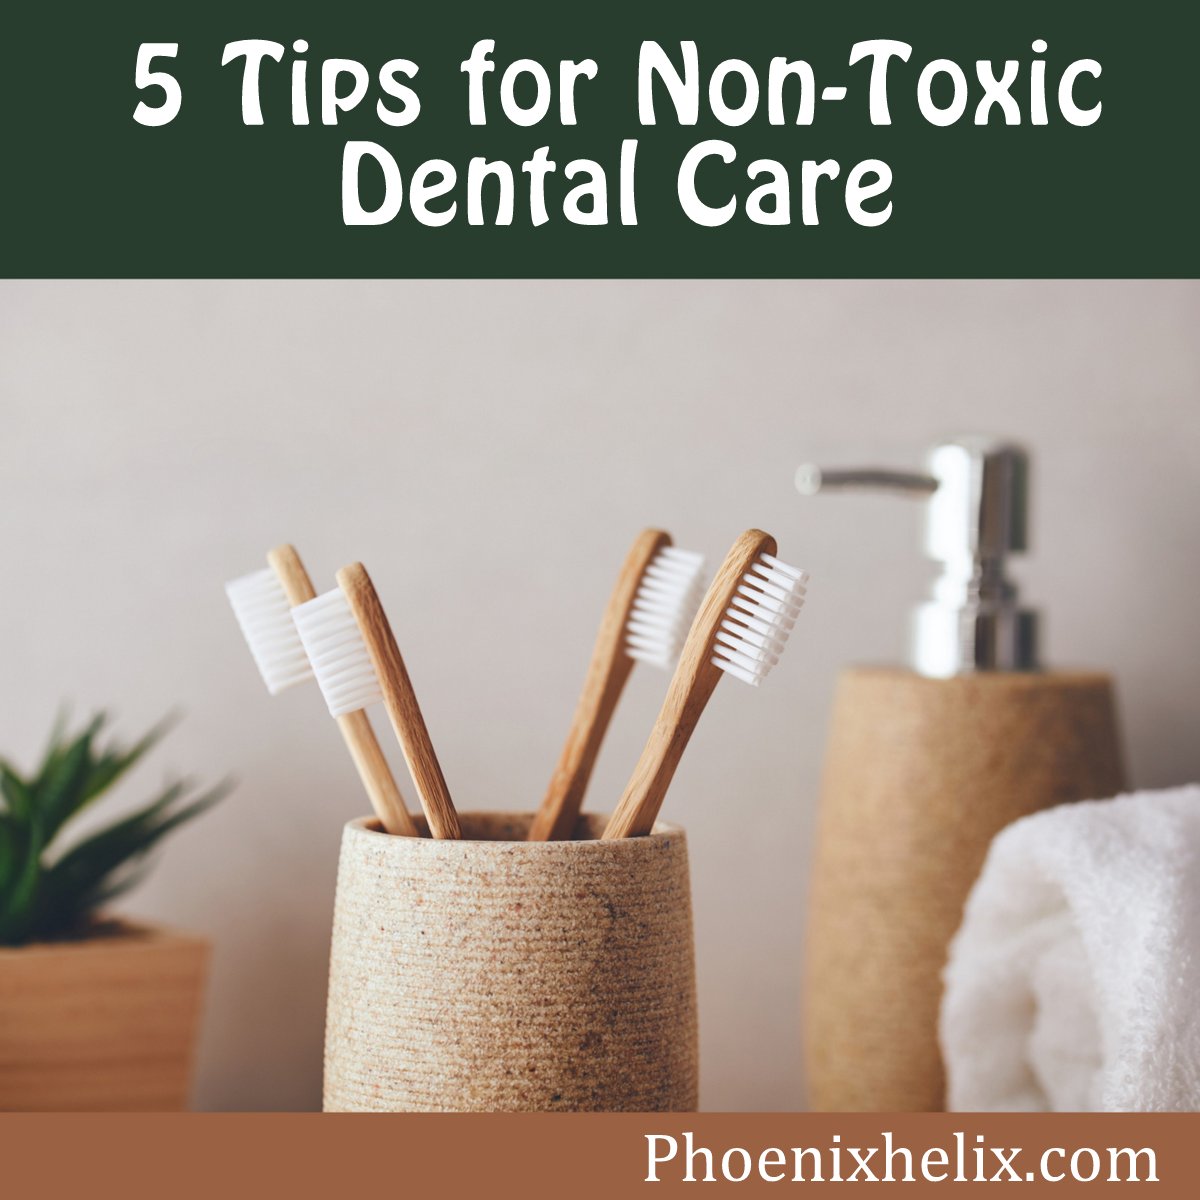 5 Tips for Non-Toxic Dental Care | Phoenix Helix